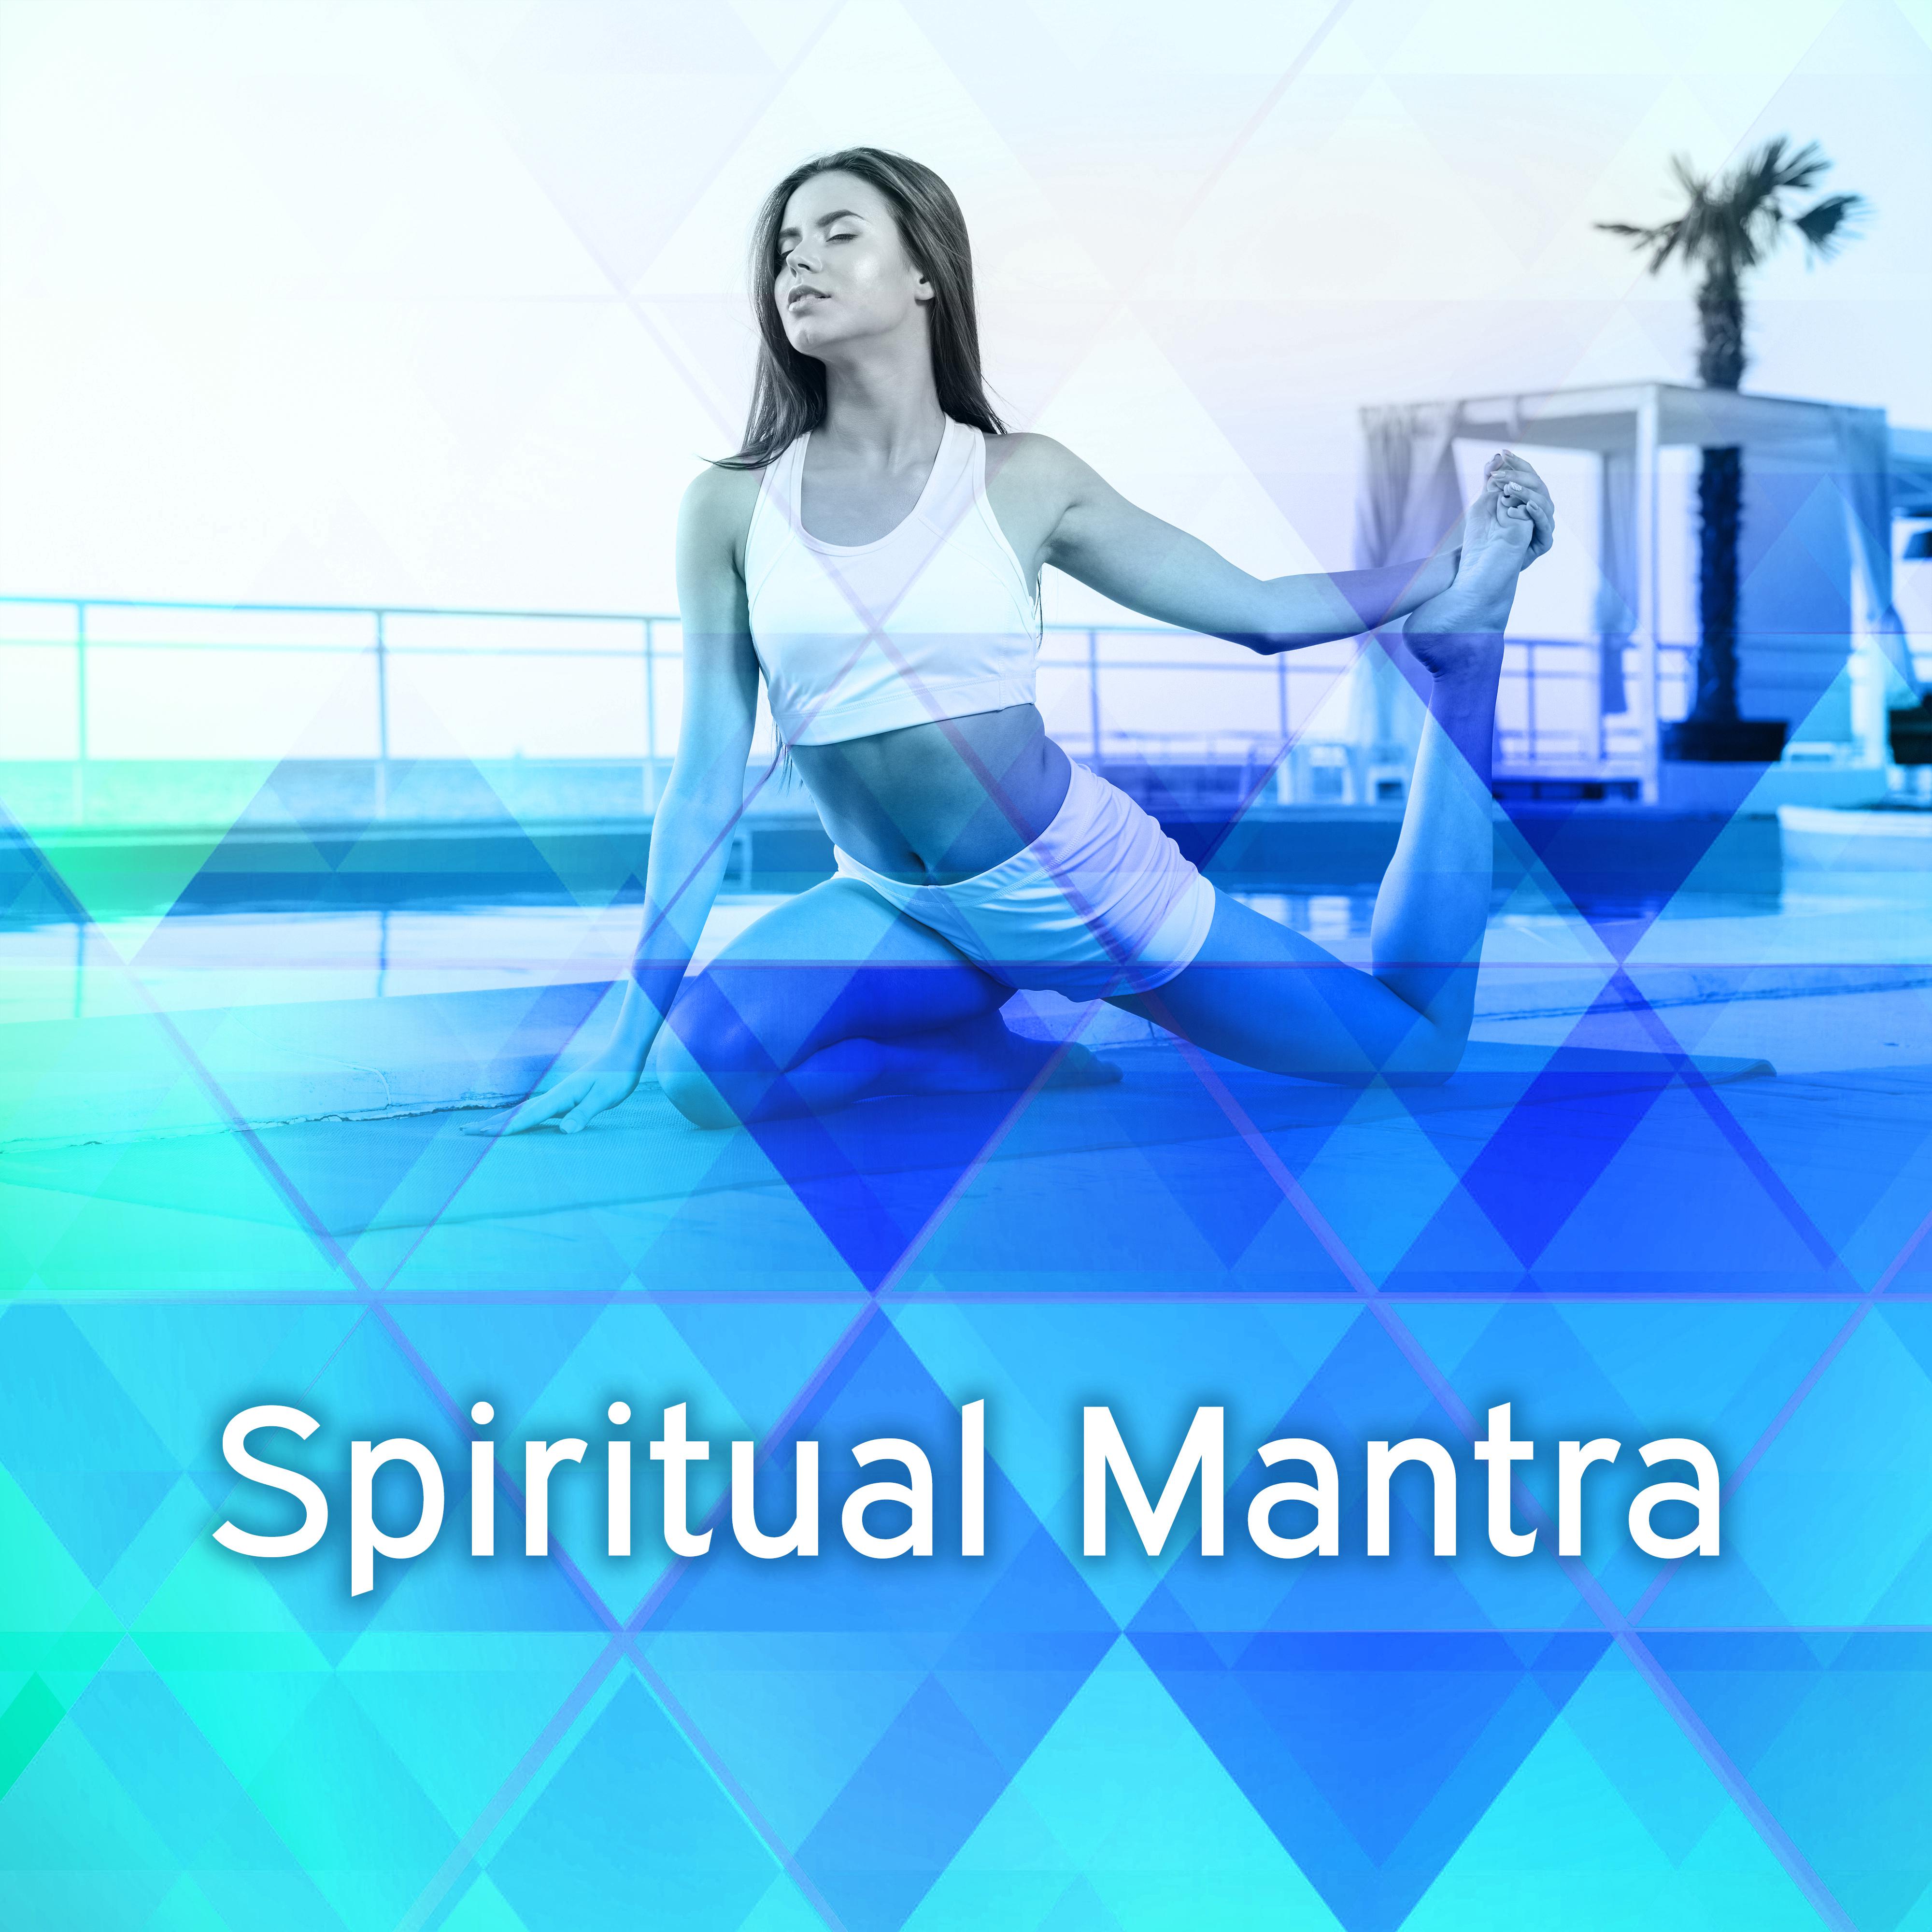 Spiritual Mantra  Meditation Music, Peaceful Mind, Harmony, Nature Sounds for Relaxation, Healing Music, Stress Relief, Calmness